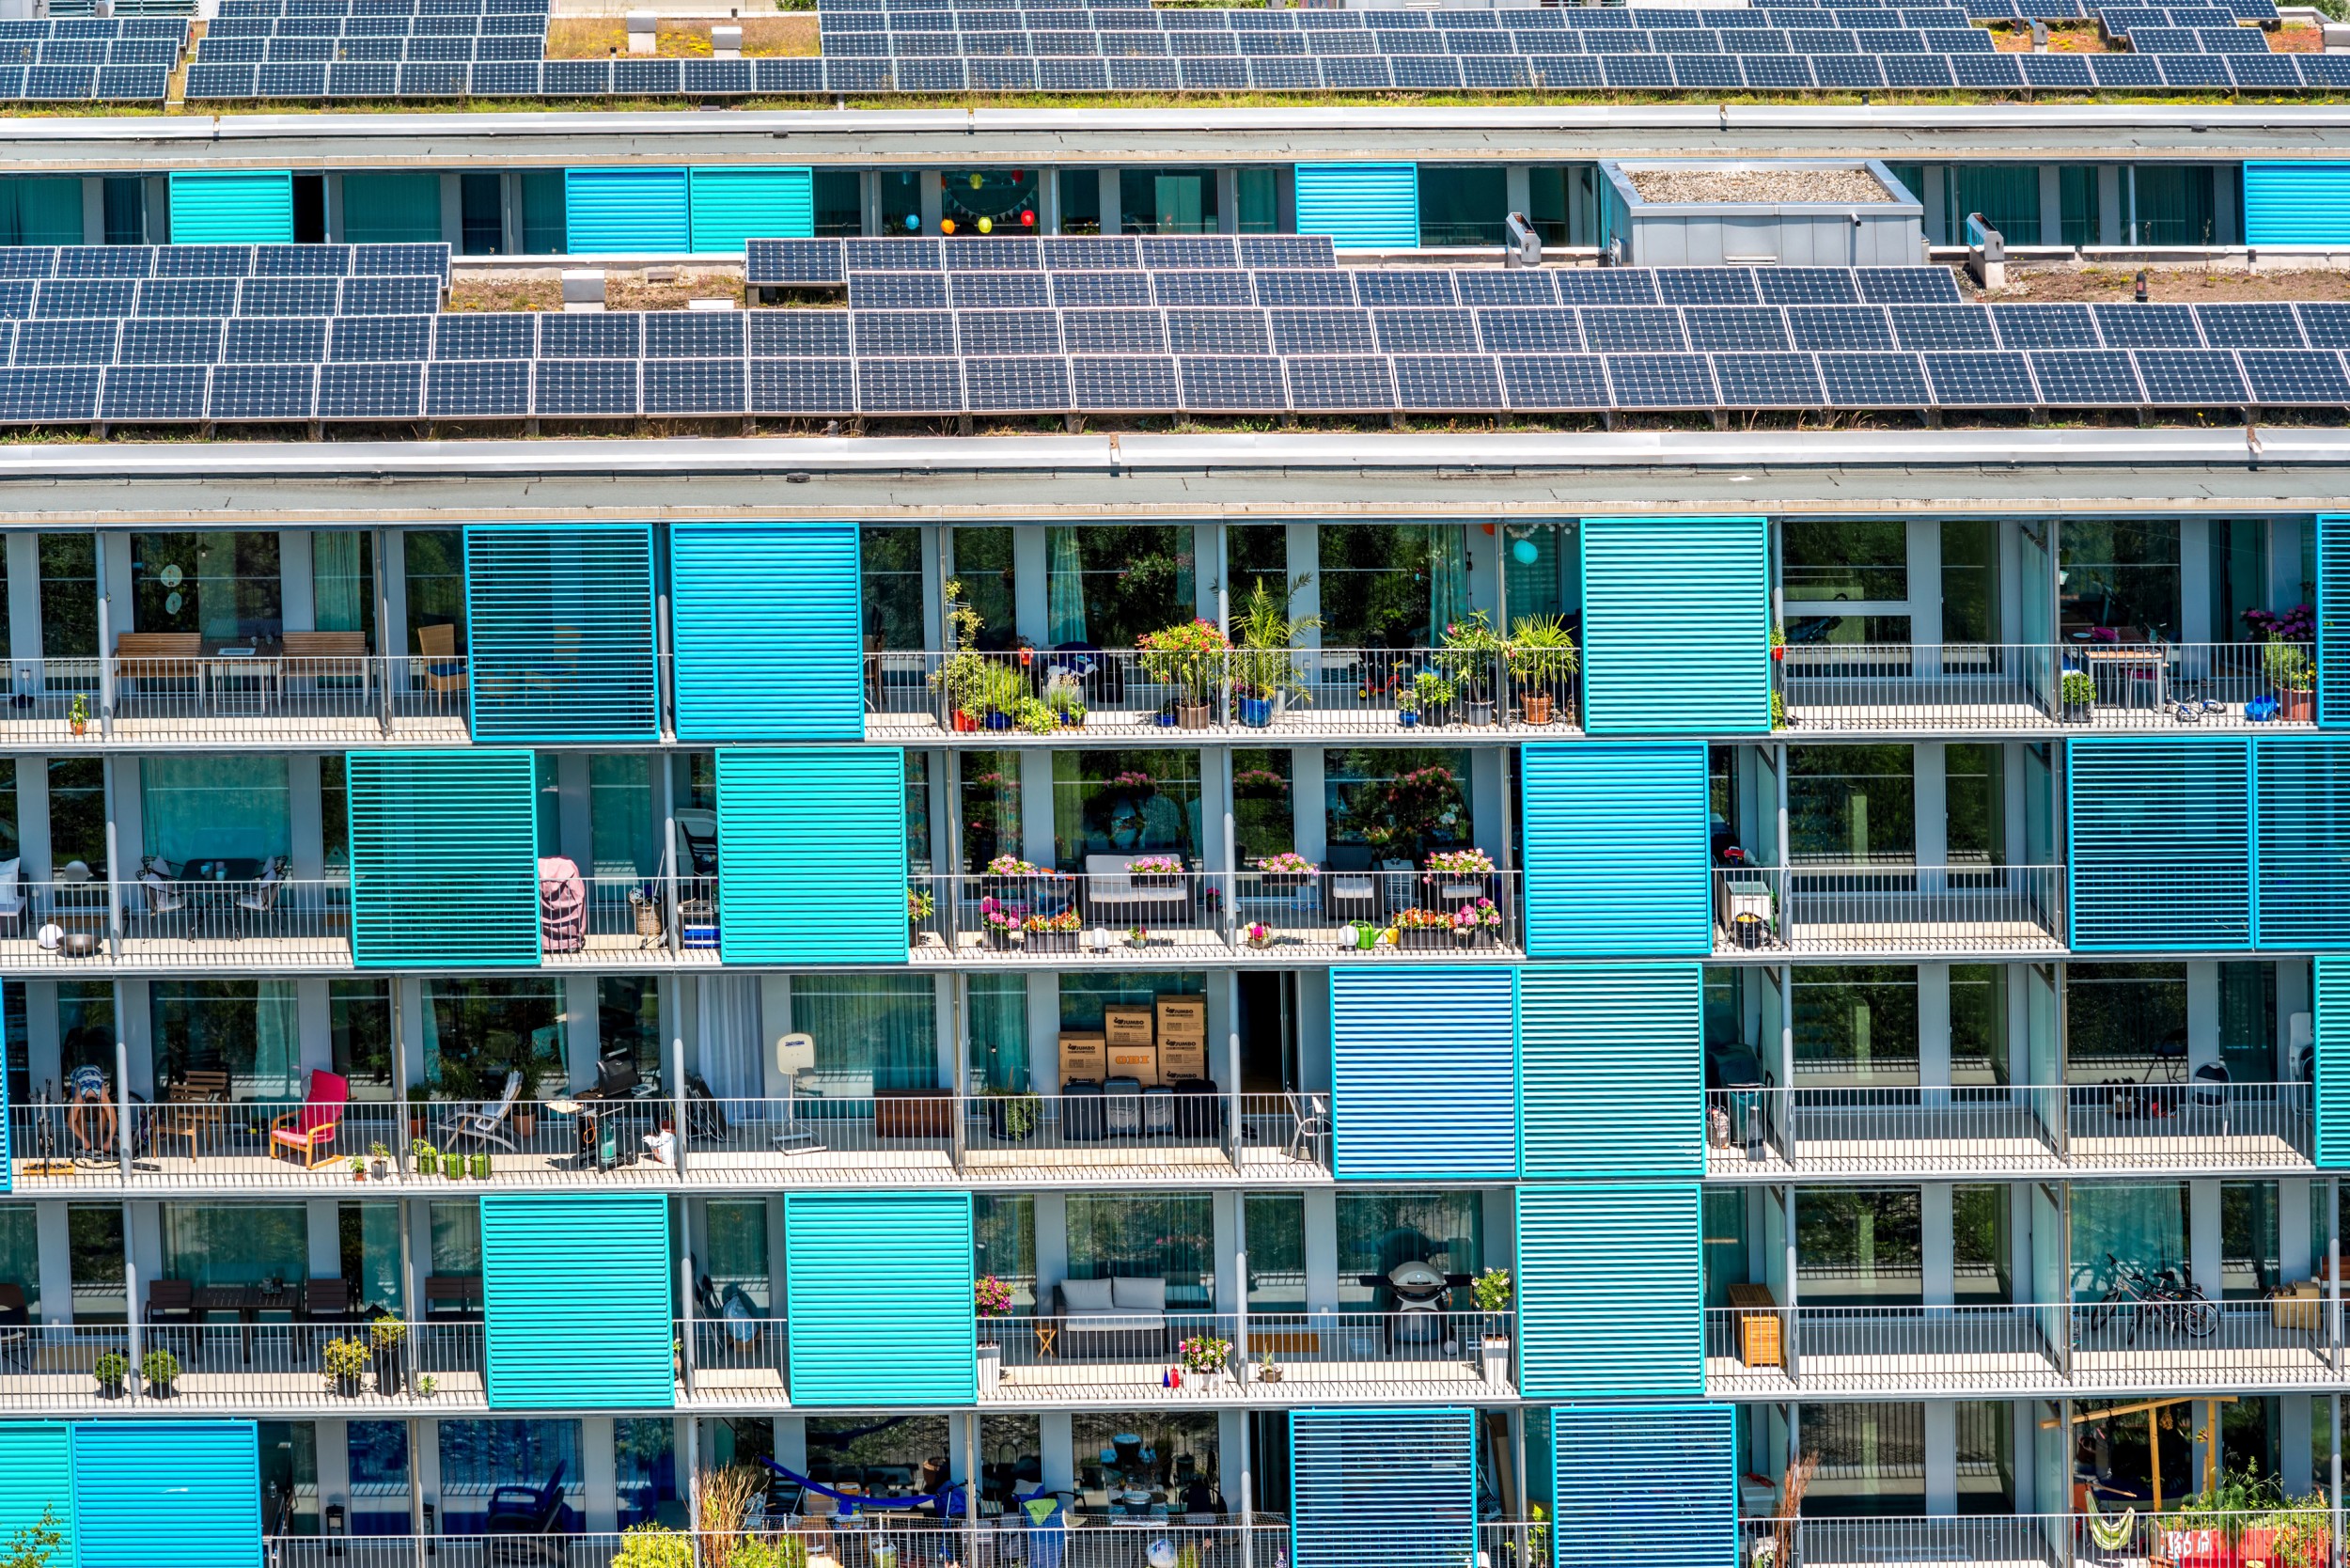 The concept of sharing renewable energy with neighbours is popular amongst the Swiss.